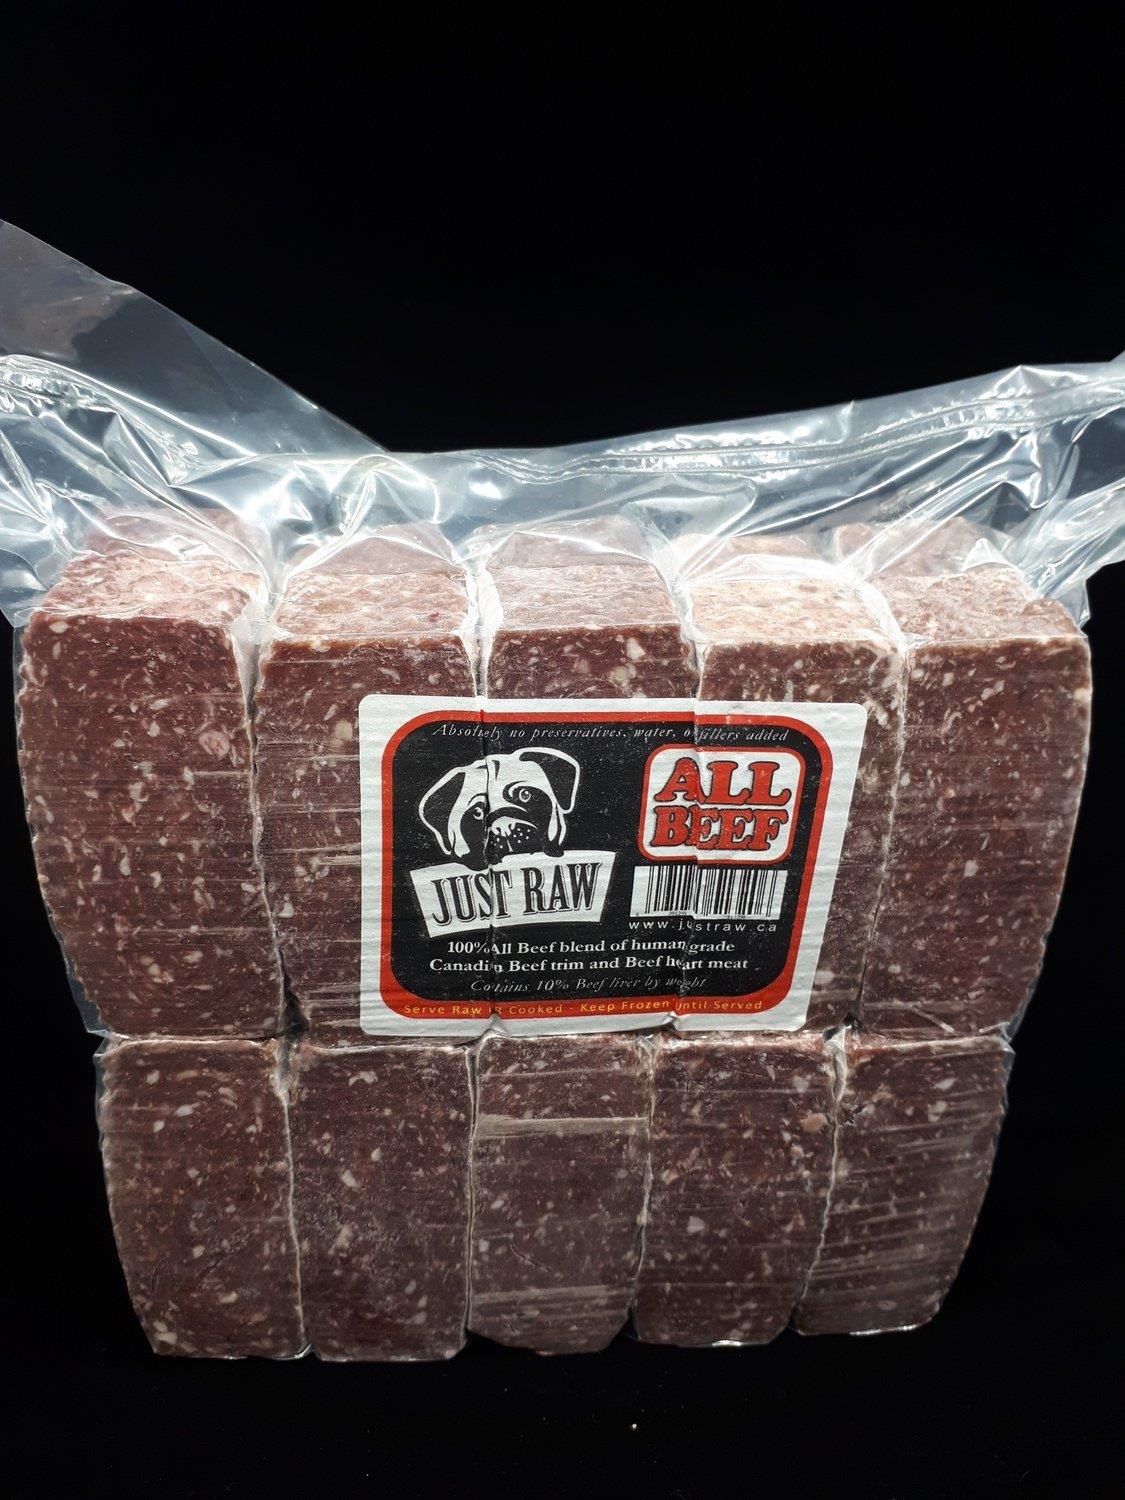 Just Raw - All Beef - 5lbs